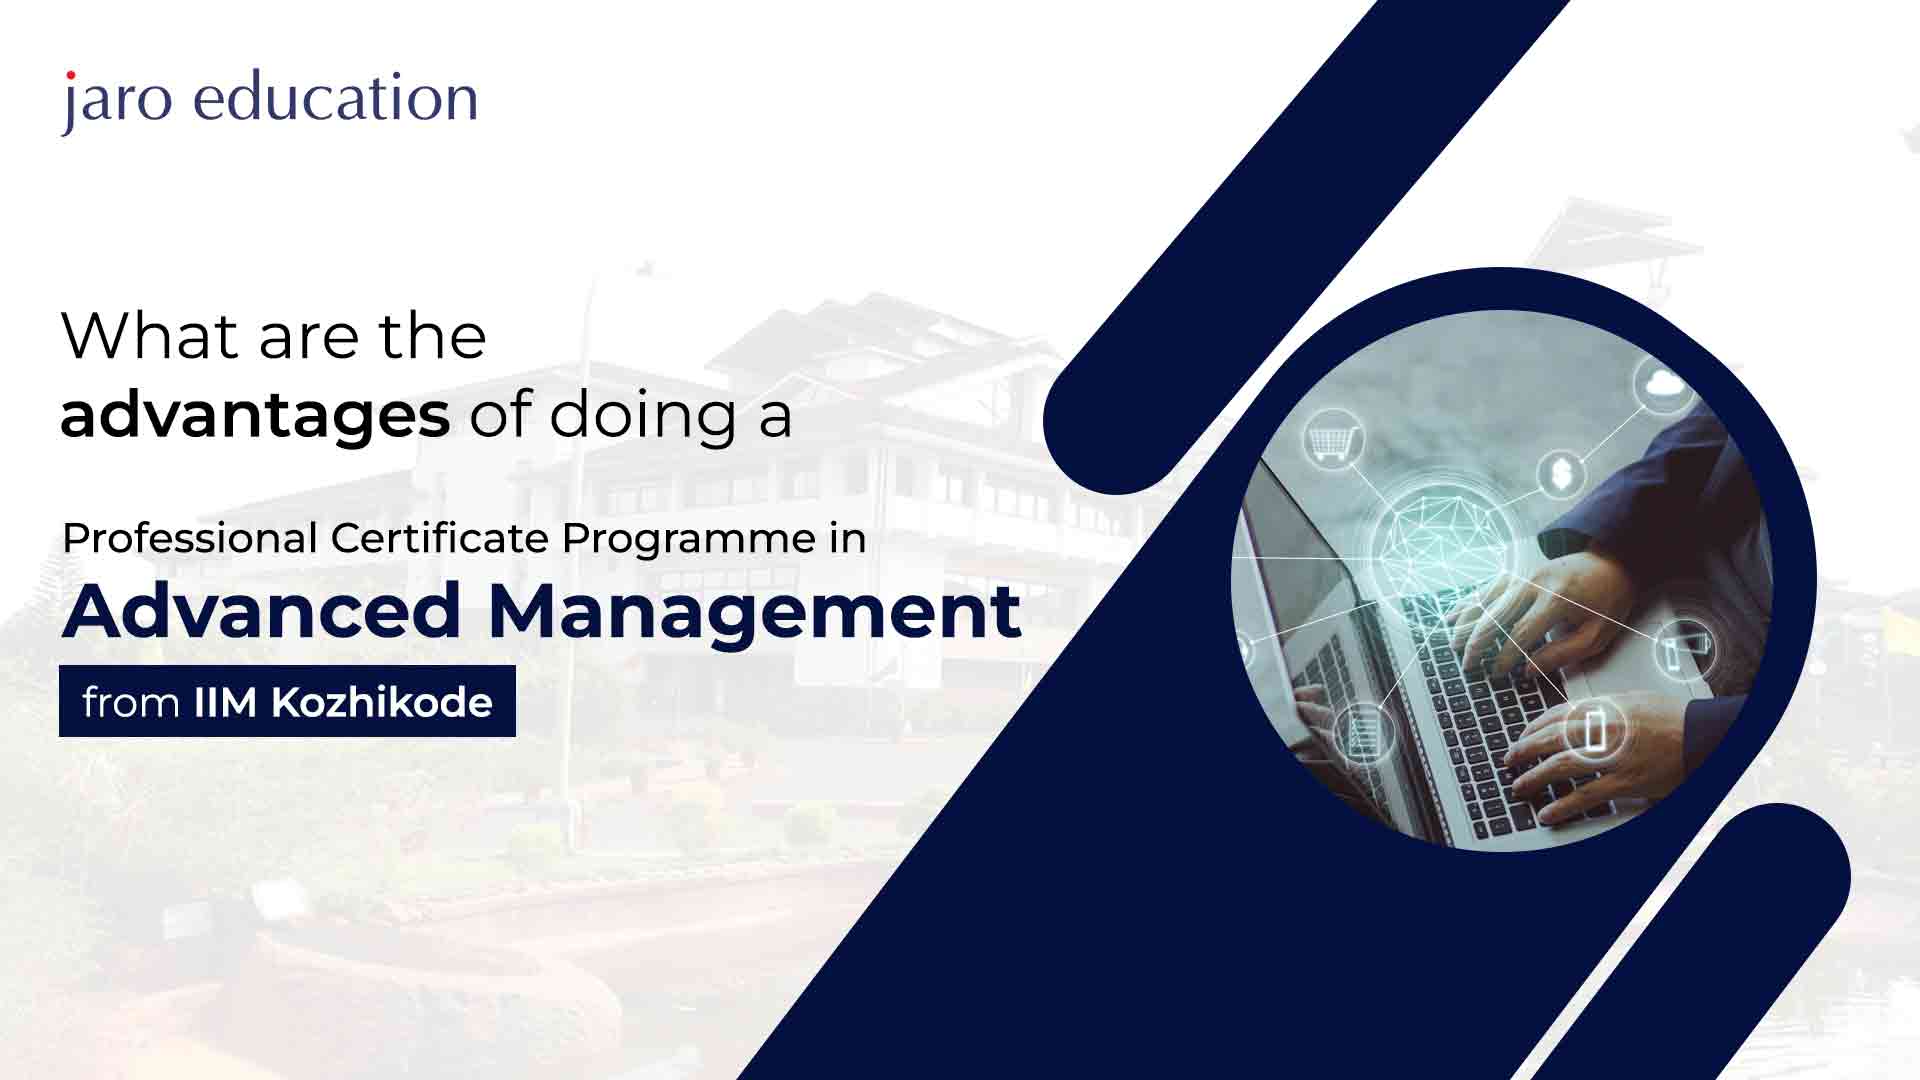 What Are The Advantages Of Doing A Professional Certificate Programme In Advanced Management From IIM Kozhikode Blog